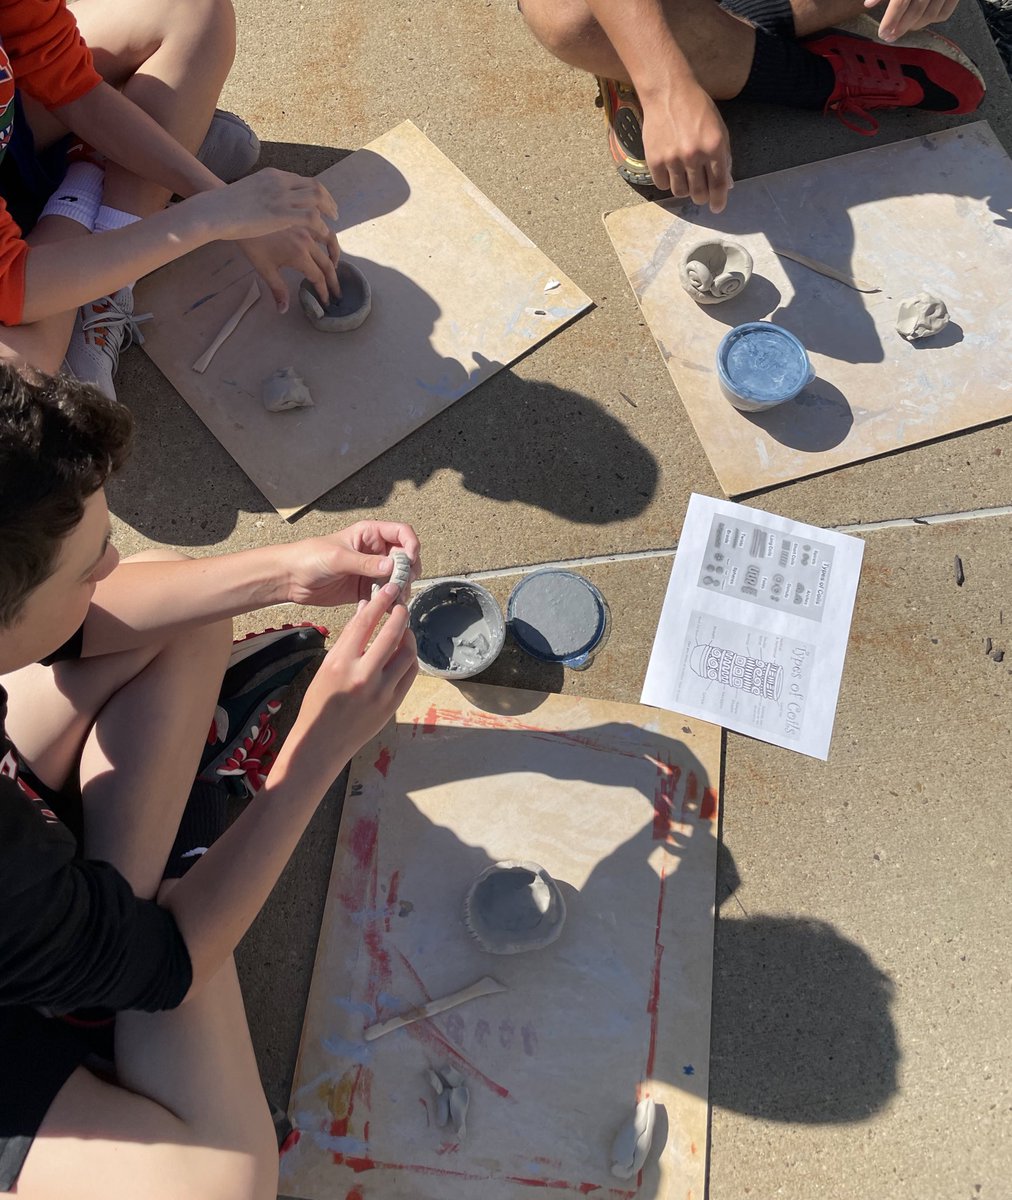 8th grade ceramics outside! We had a great morning building pinch pots and coils in the sun ☀️ #avonworthartists @mhall_AMS